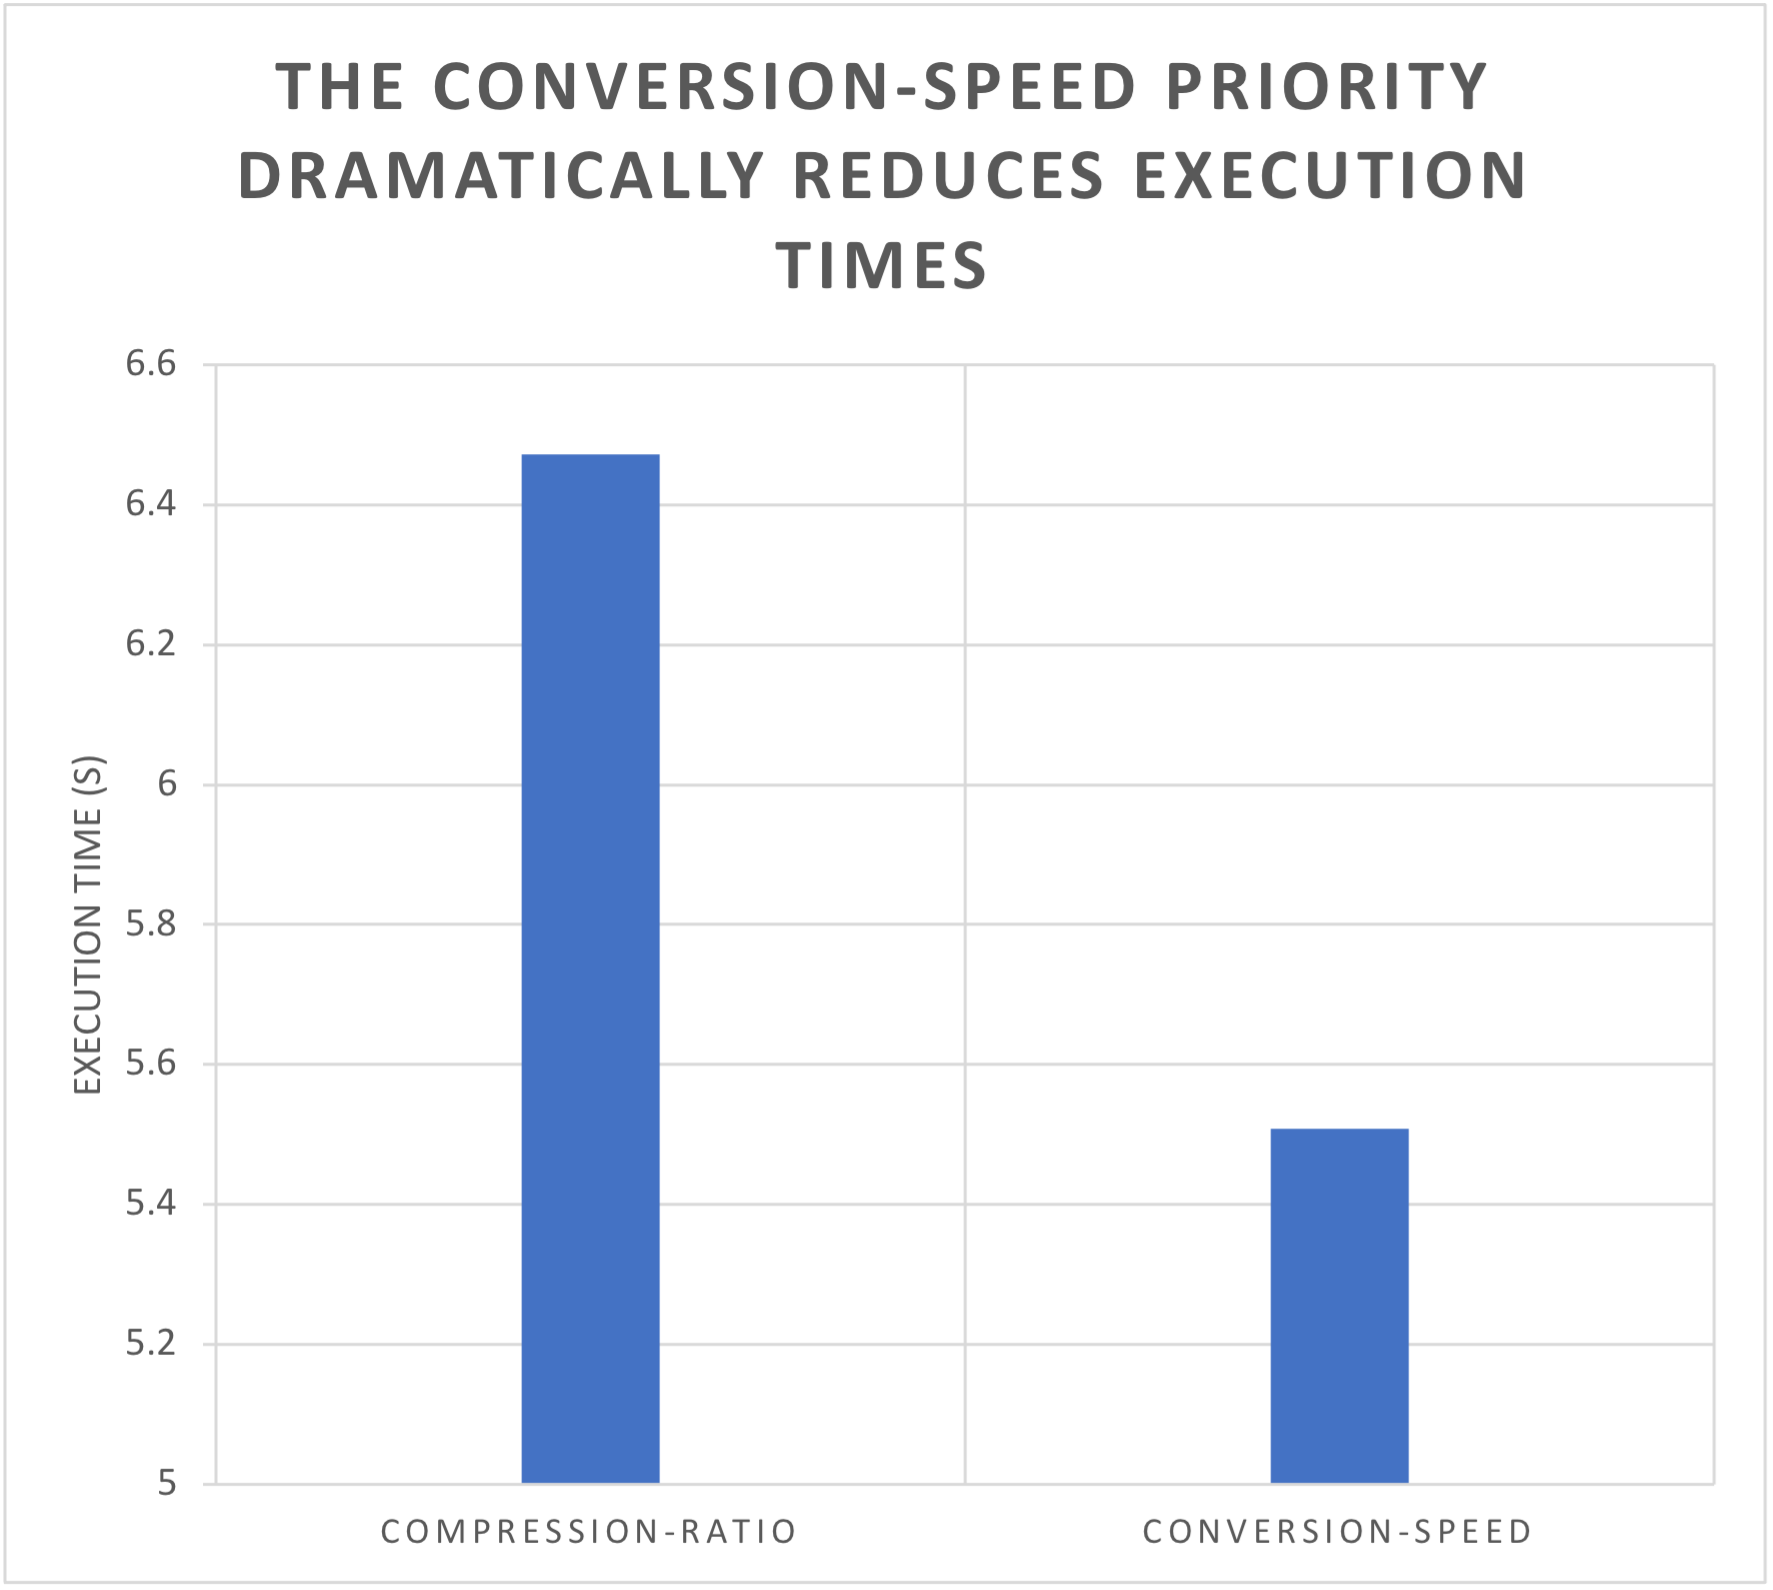 Chart: The conversion-speed priority dramatically reduces execution times